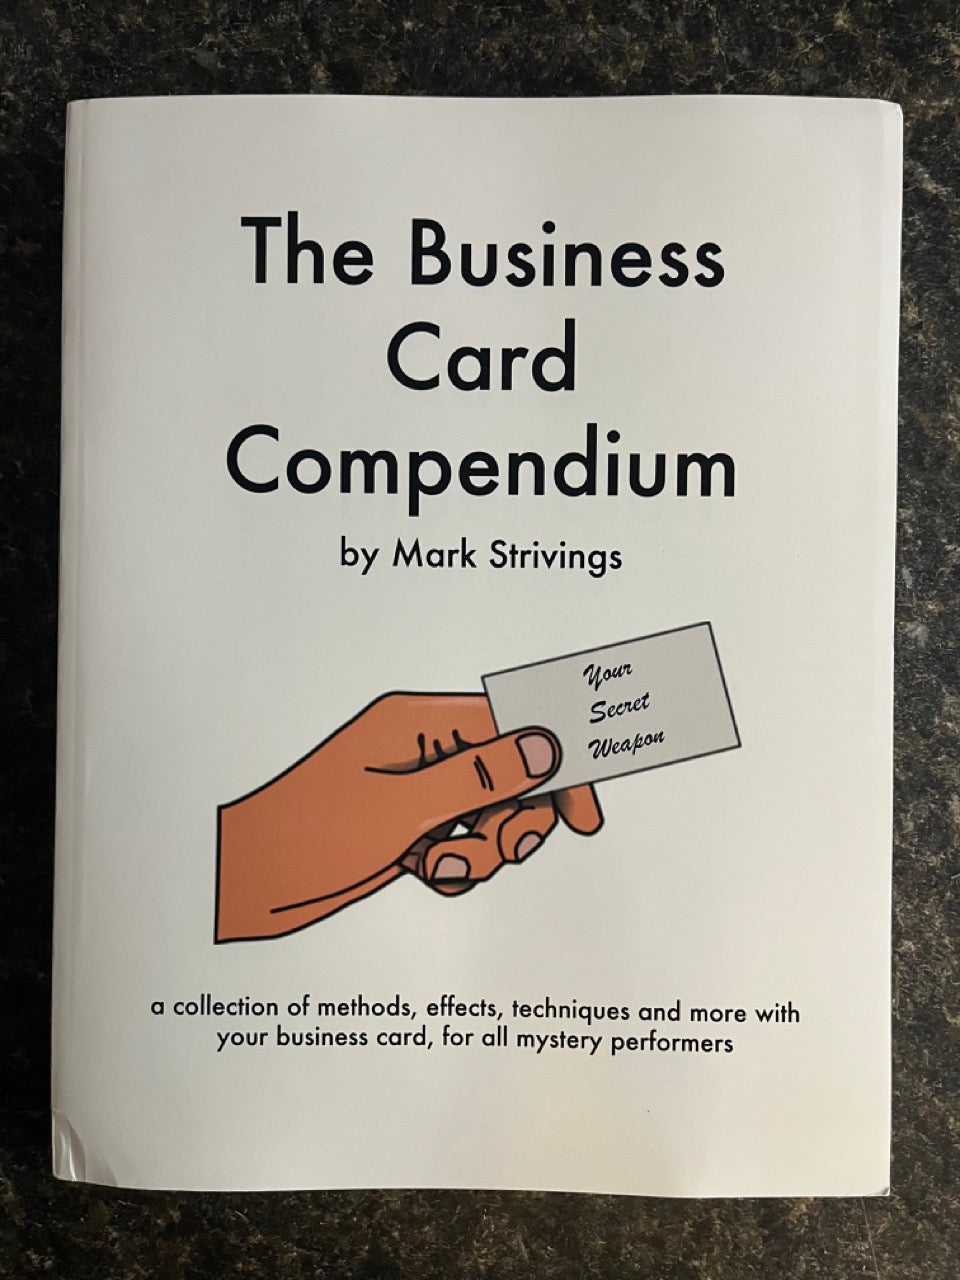 The Business Card Compendium - Mark Strivings